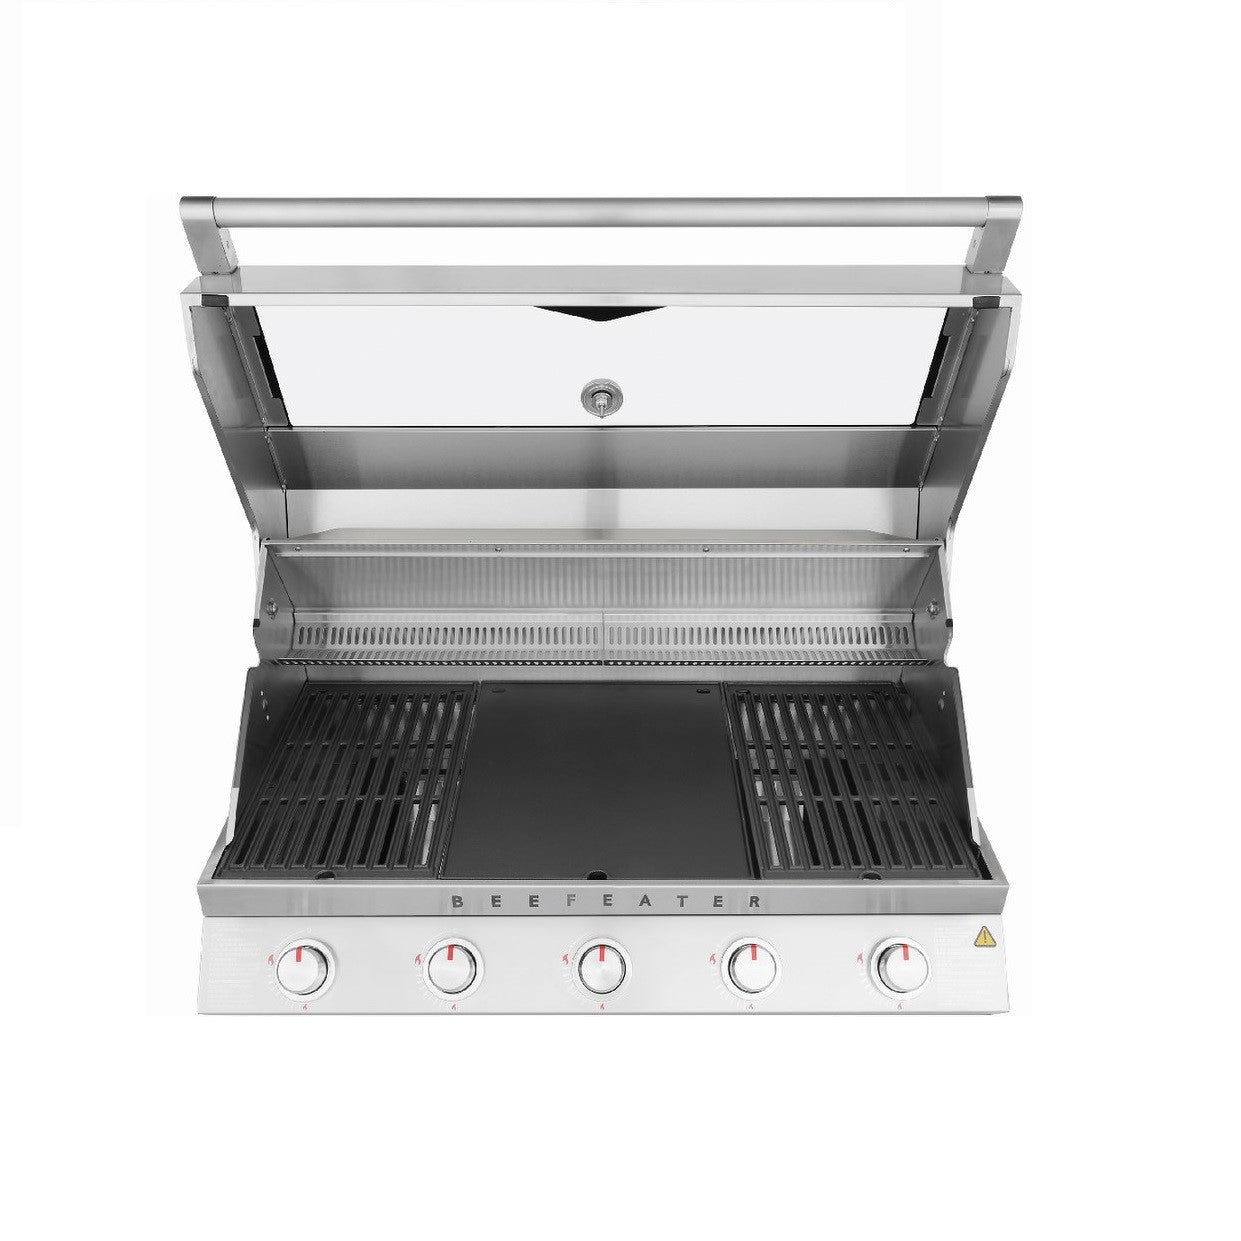 Beefeater 7000 Classic Series 5 Burner Built in BBQ Grill